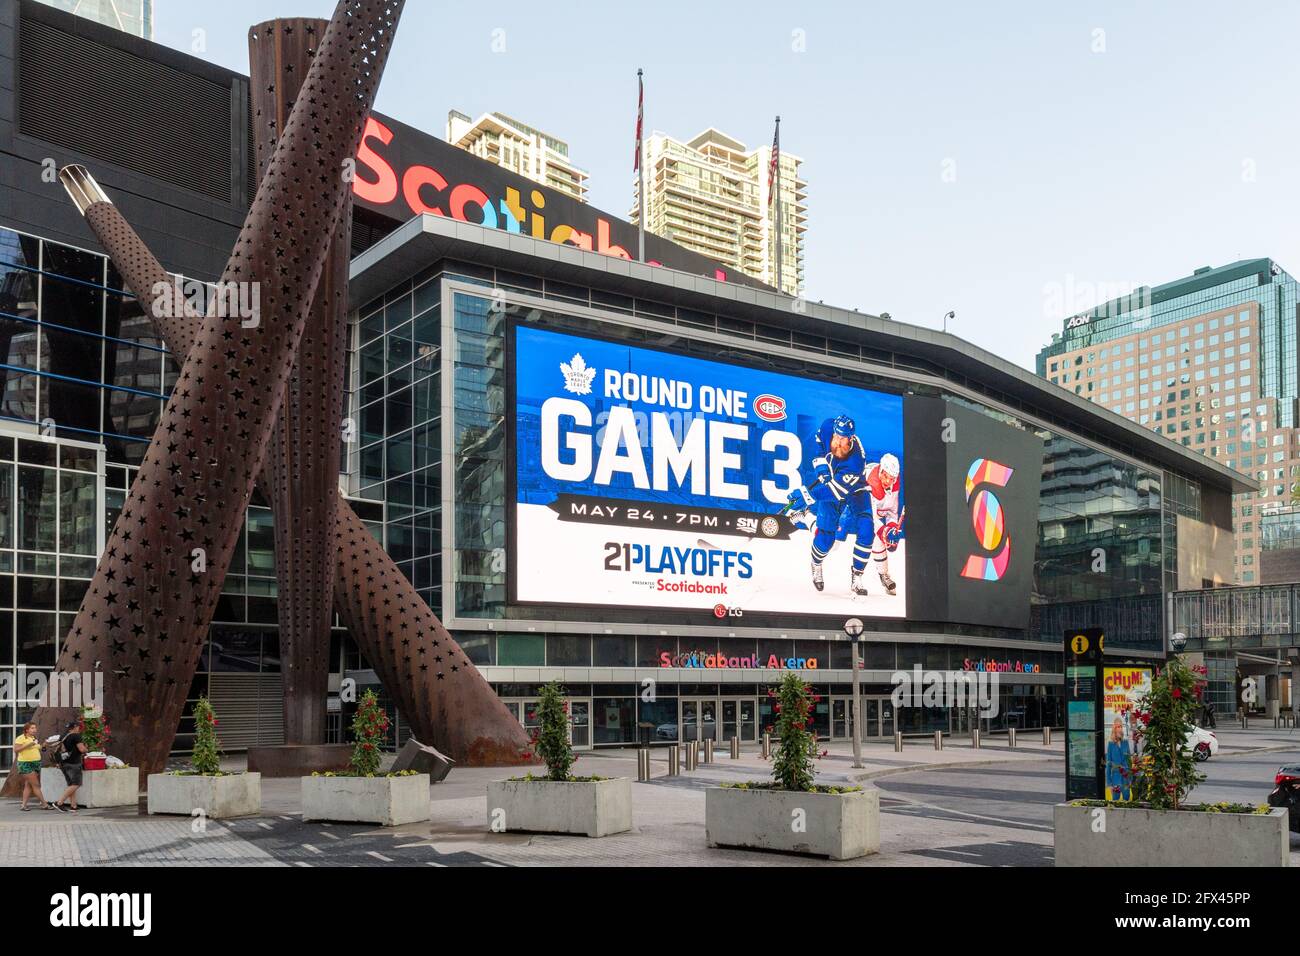 Giant screen of the Scotiabank Arena announcing Game 3 of the Hockey Play Off where the Maple Leafs are involved, Toronto, Canada Stock Photo